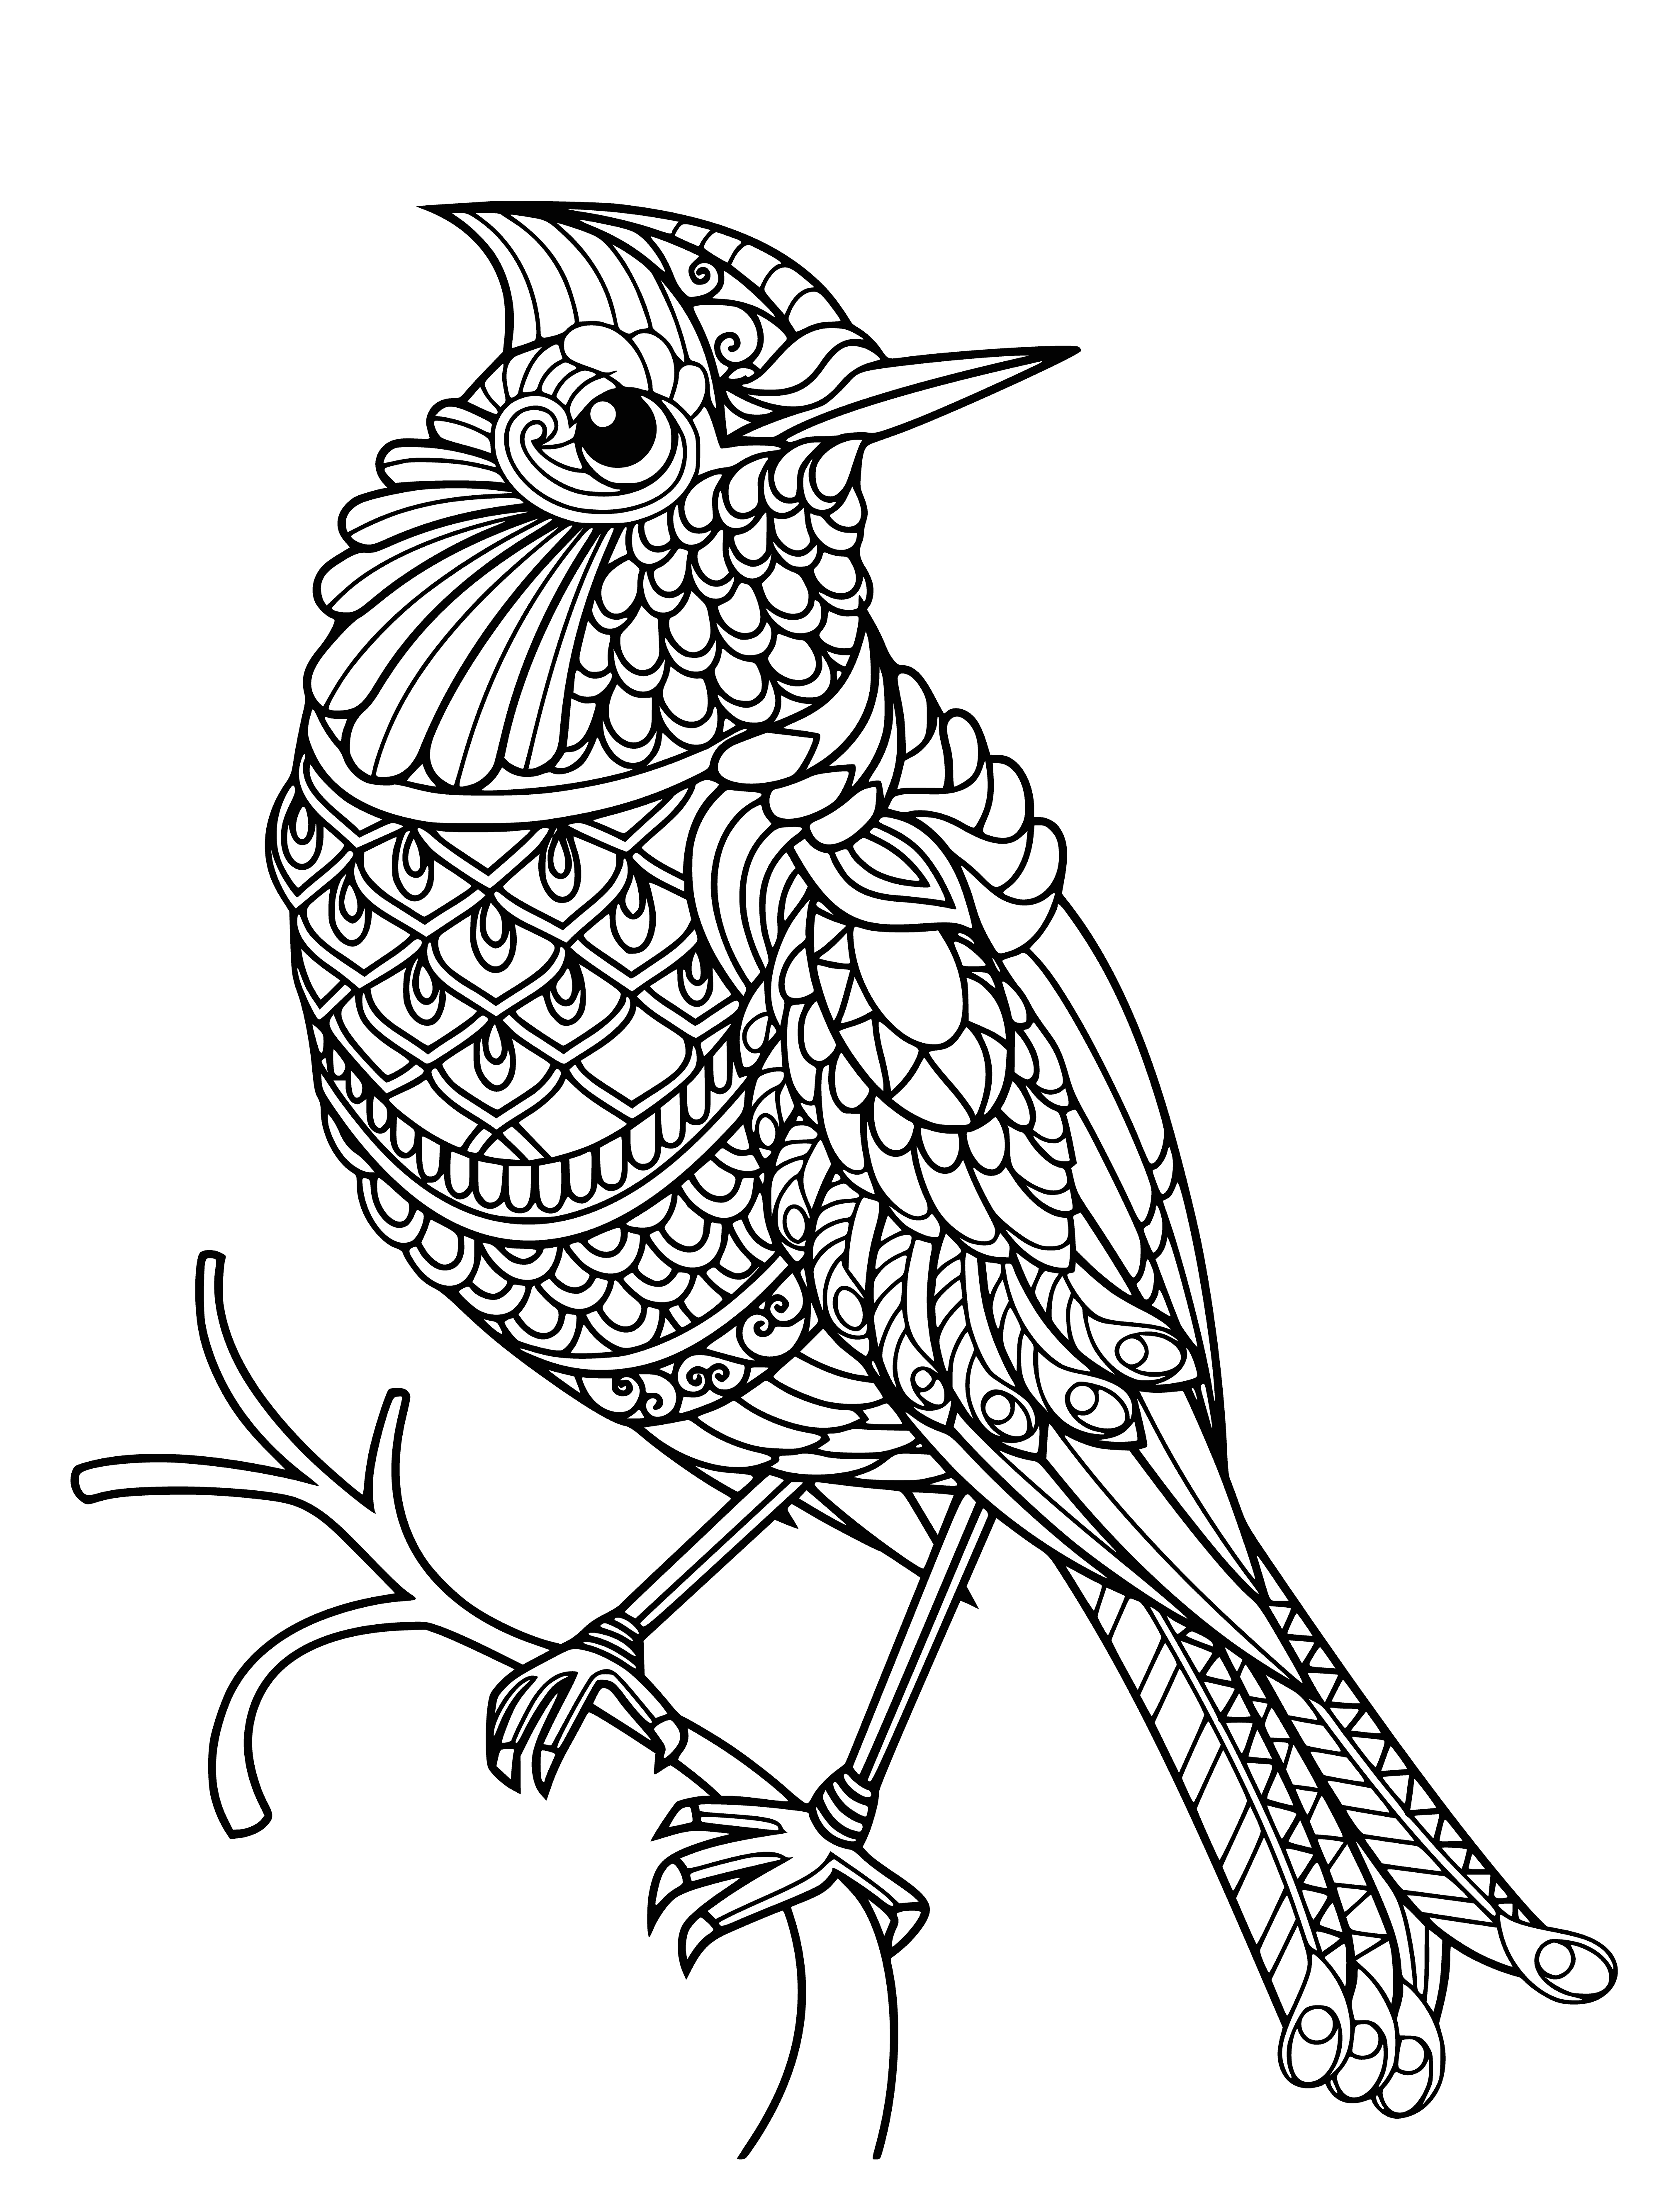 A bird on a branch coloring page